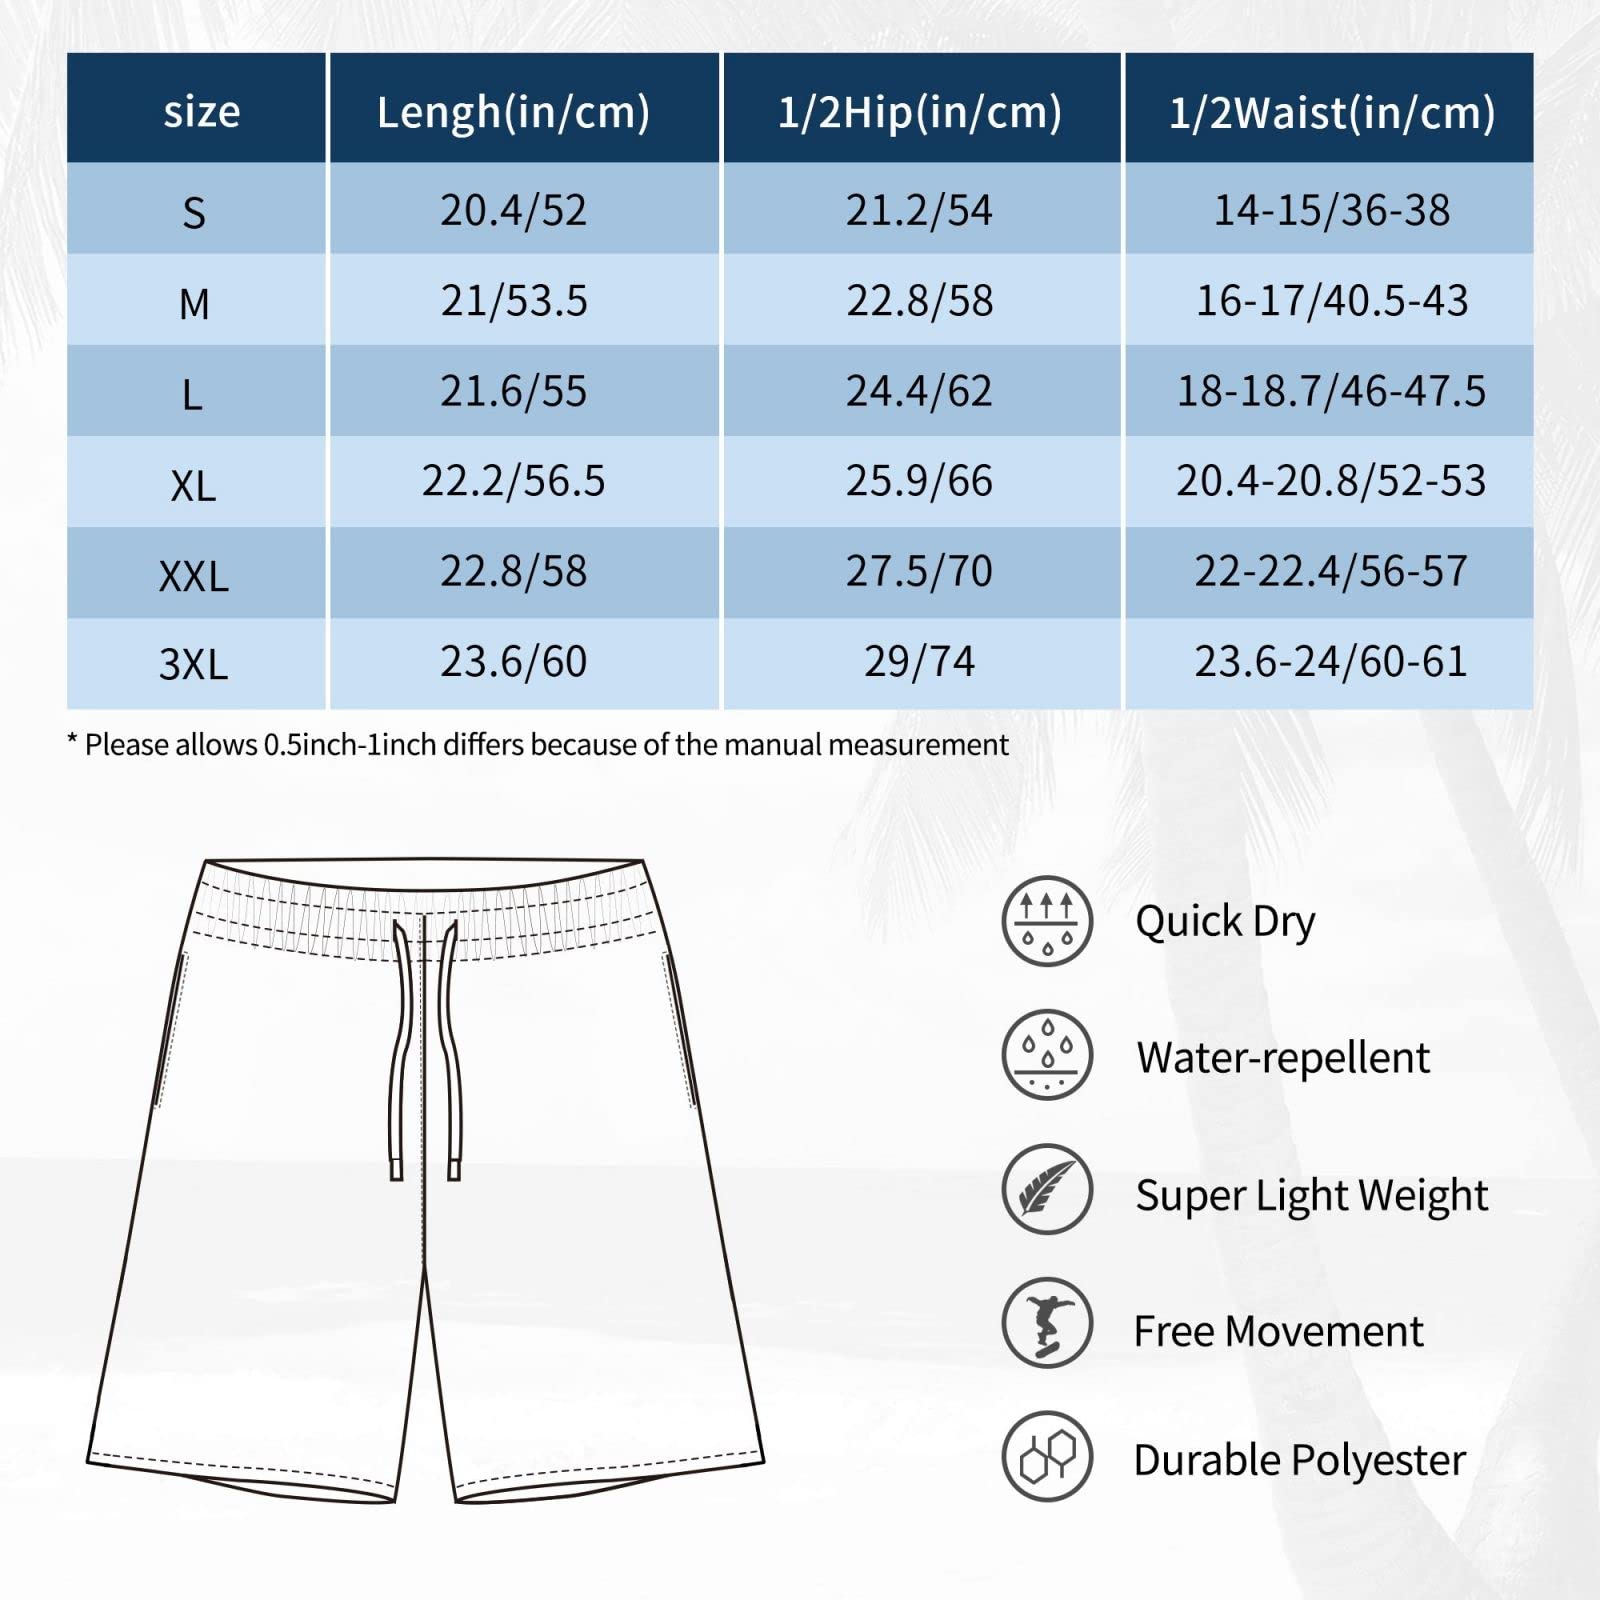 WZOMT Men's Beach Board Shorts Quick Dry Swim Trunks Summer Novelty Swimwear Bathing Suits with Pockets and Mesh Lining